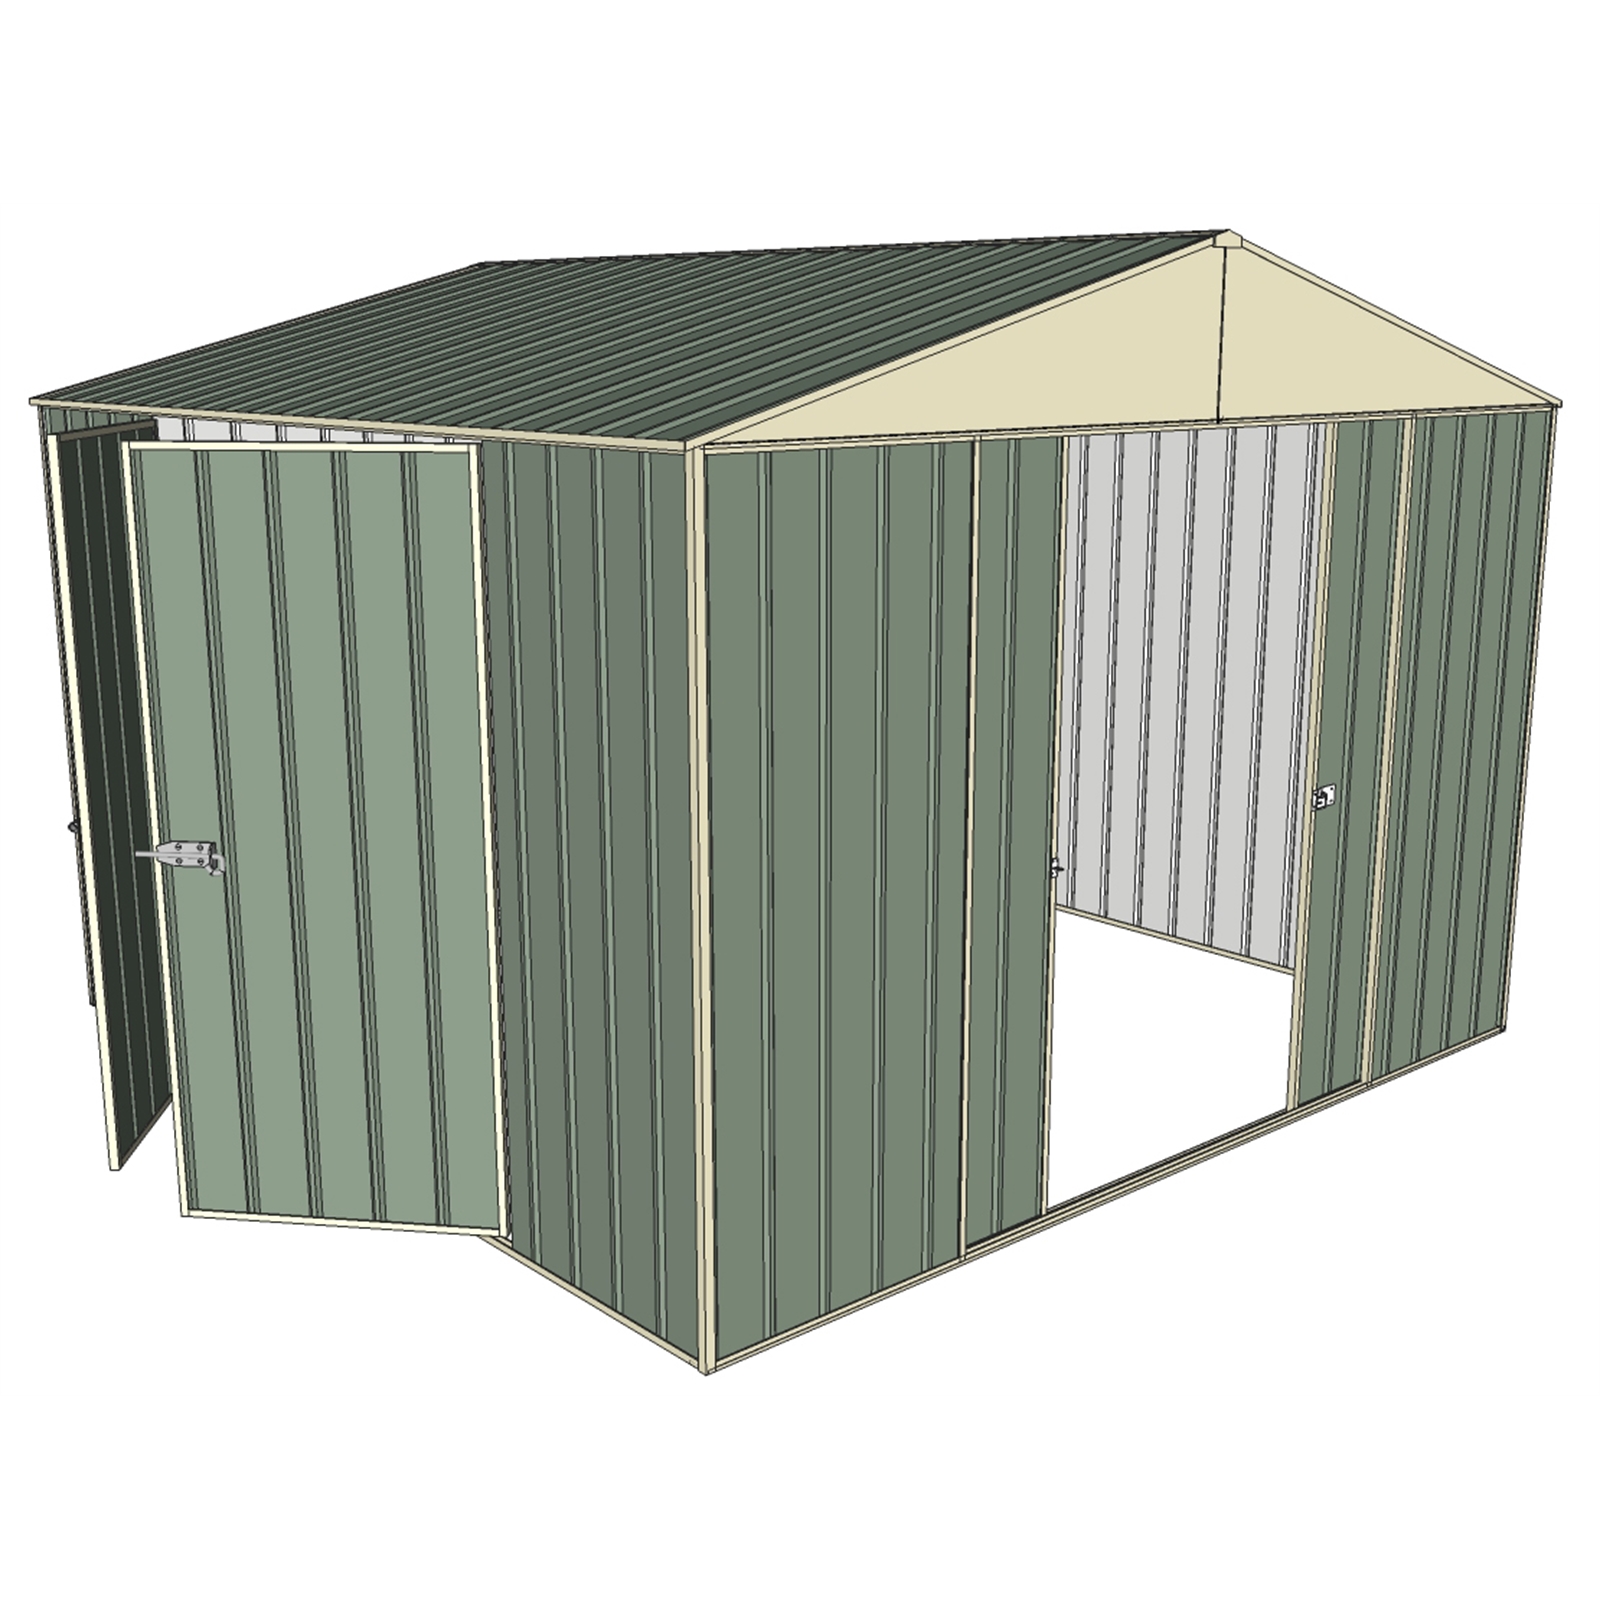 Build-a-Shed 3.0 x 3.0m Green Double Sliding & Double Hinge Door Shed